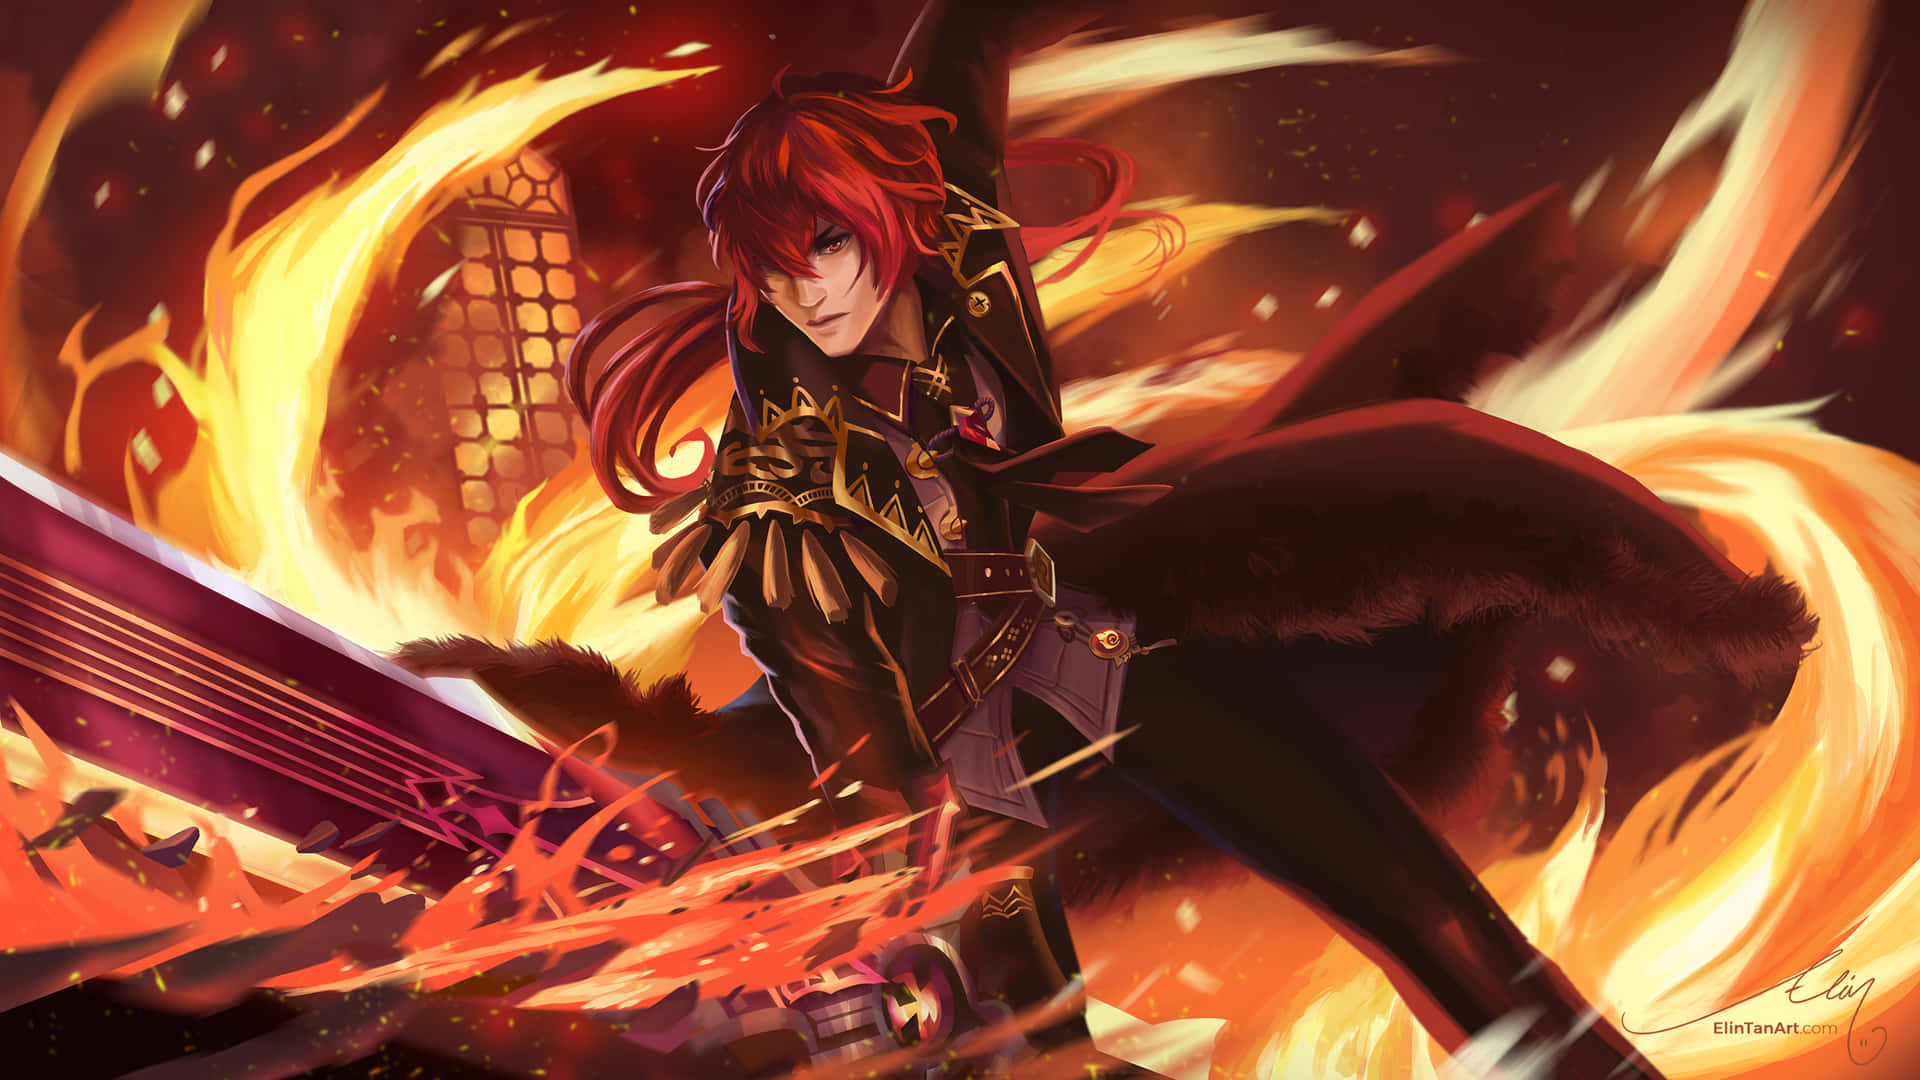 A Girl With Red Hair Holding A Sword In Flames Wallpaper